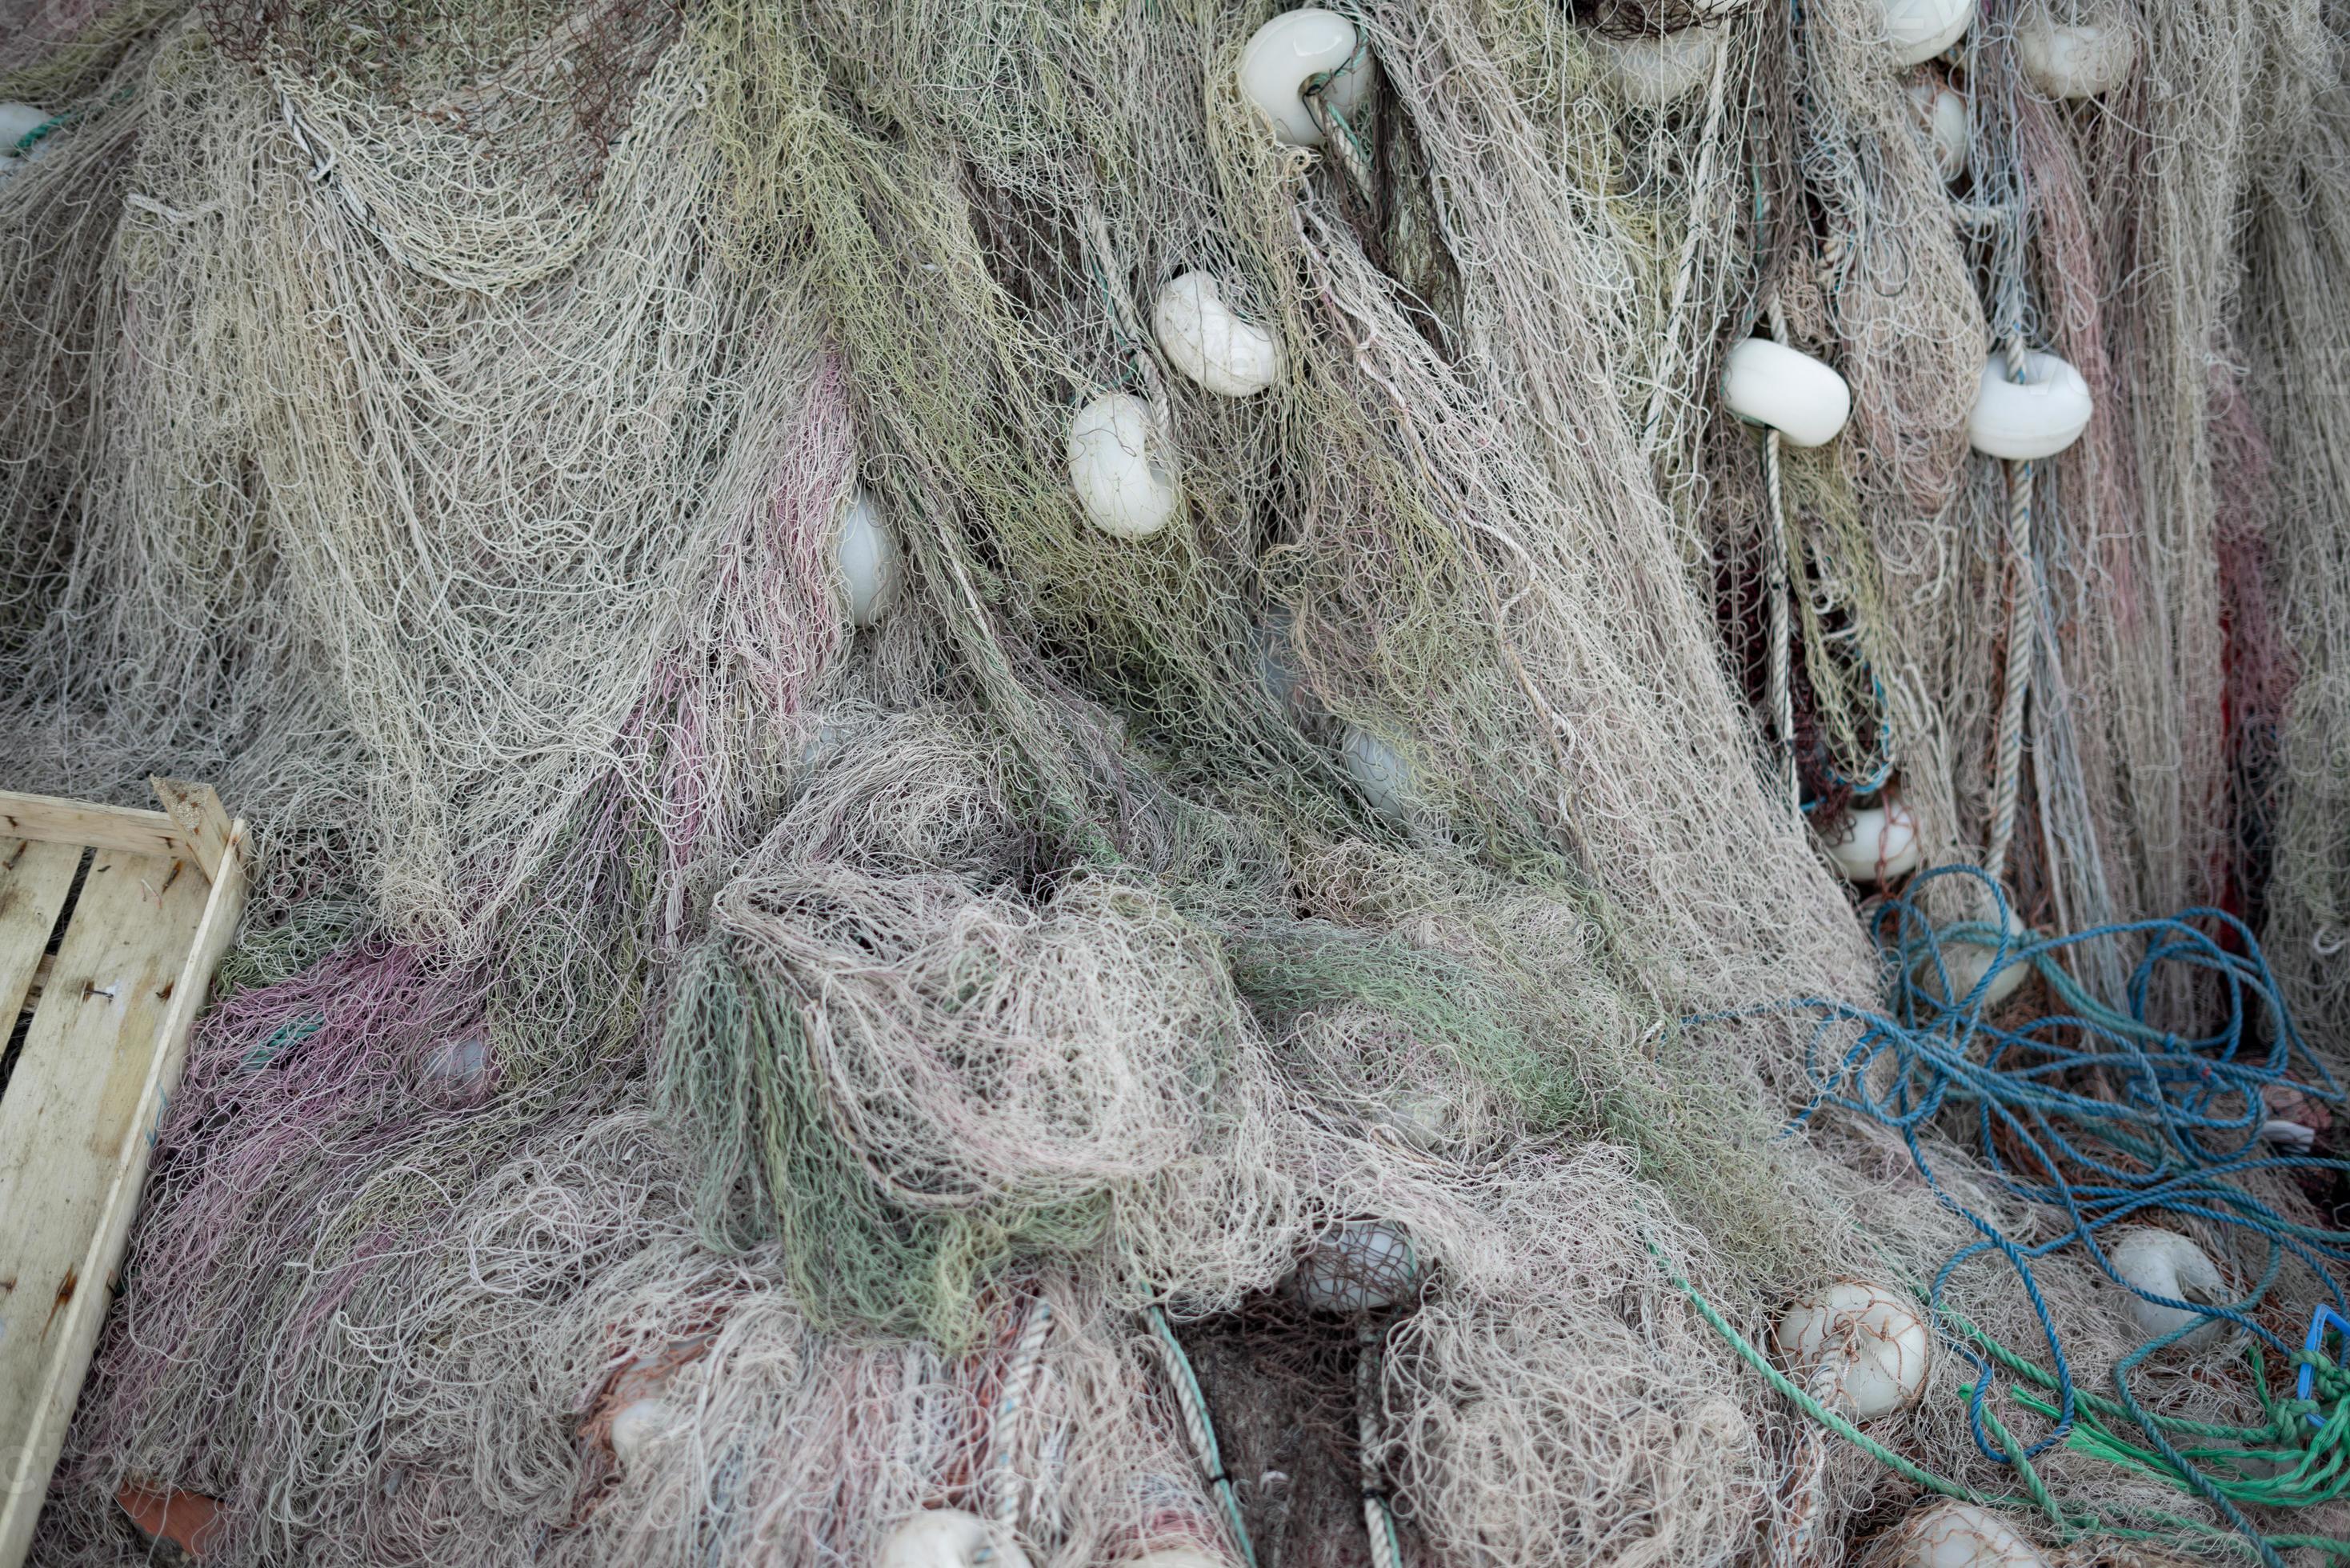 https://static.vecteezy.com/system/resources/previews/006/925/049/large_2x/stacked-fishing-nets-and-ropes-red-green-blue-and-white-photo.jpg